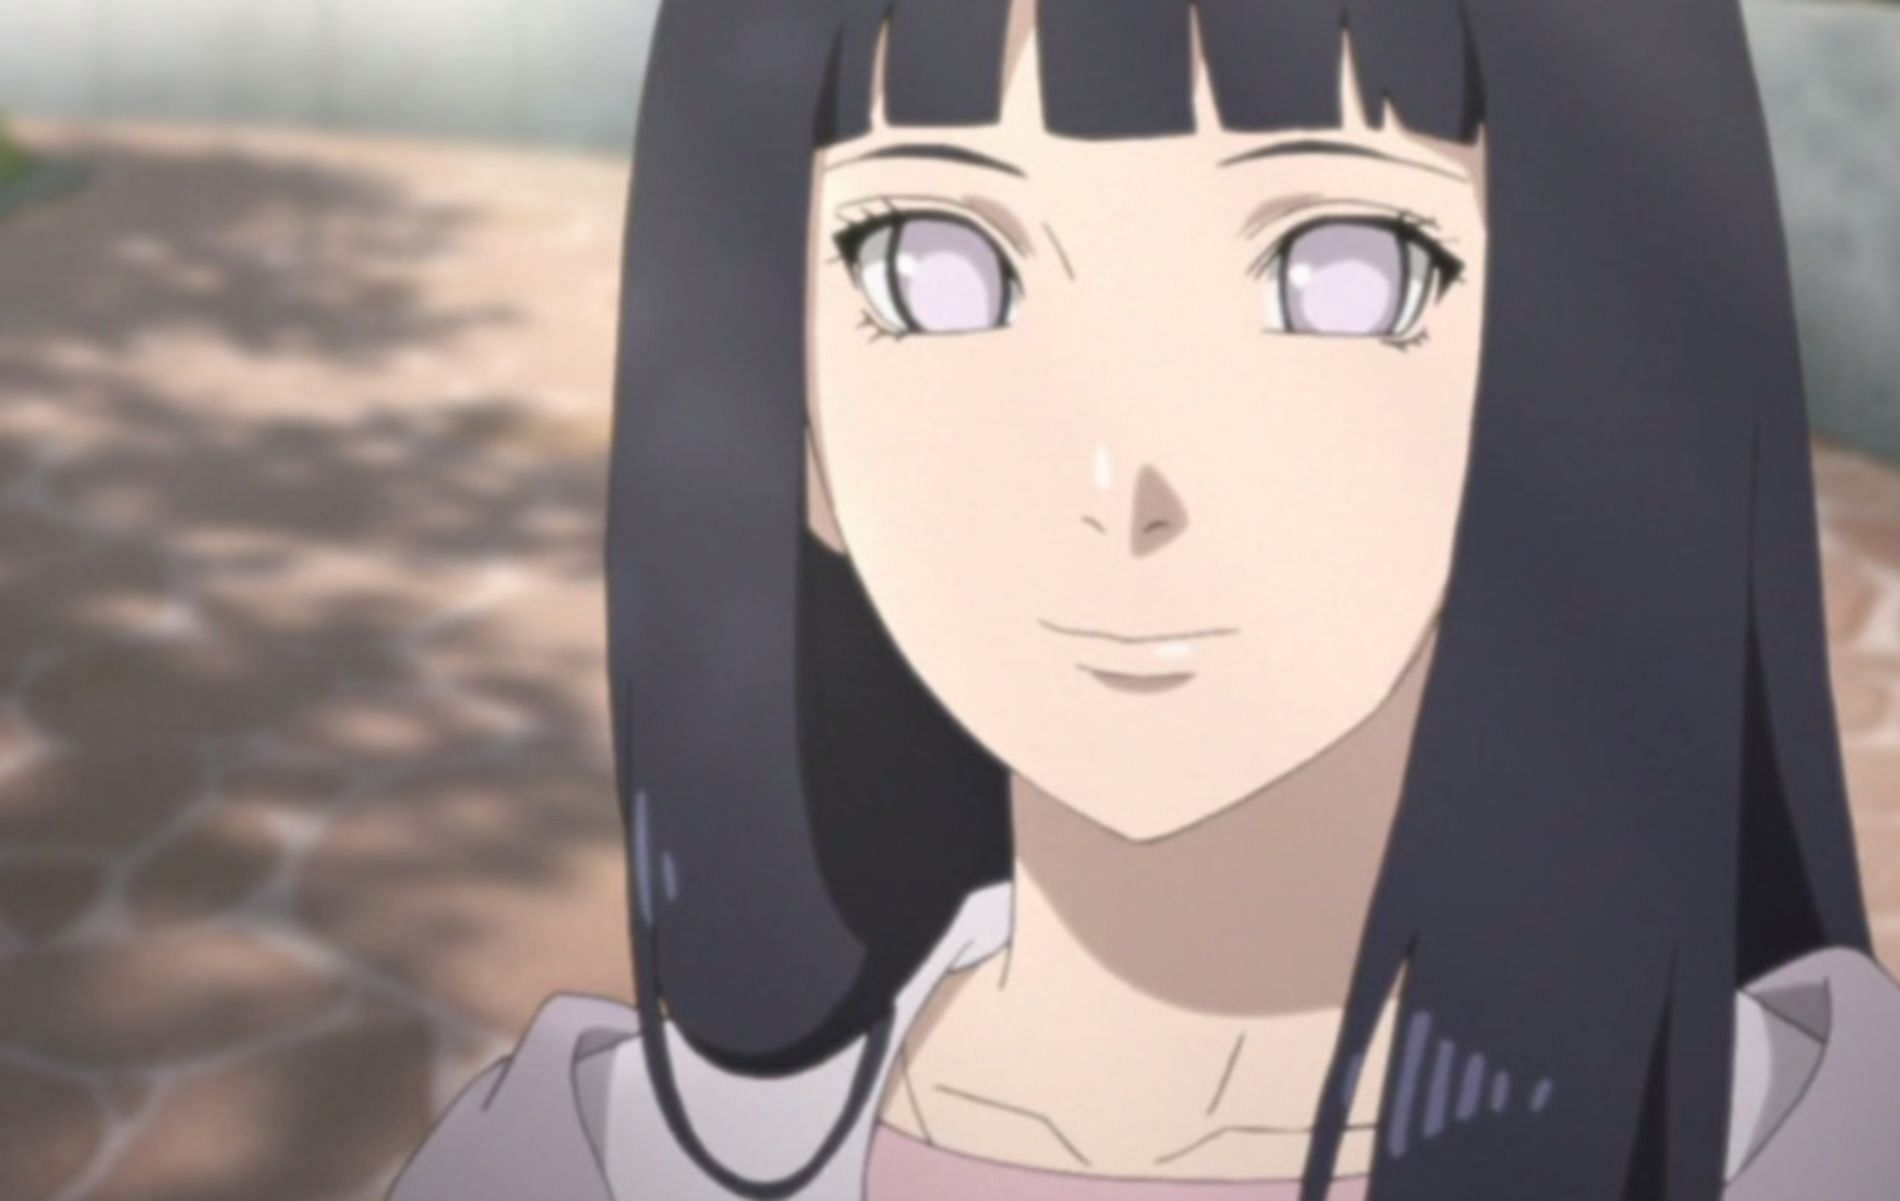 Hinata did not deserve the hate he had received (Image via Naruto)